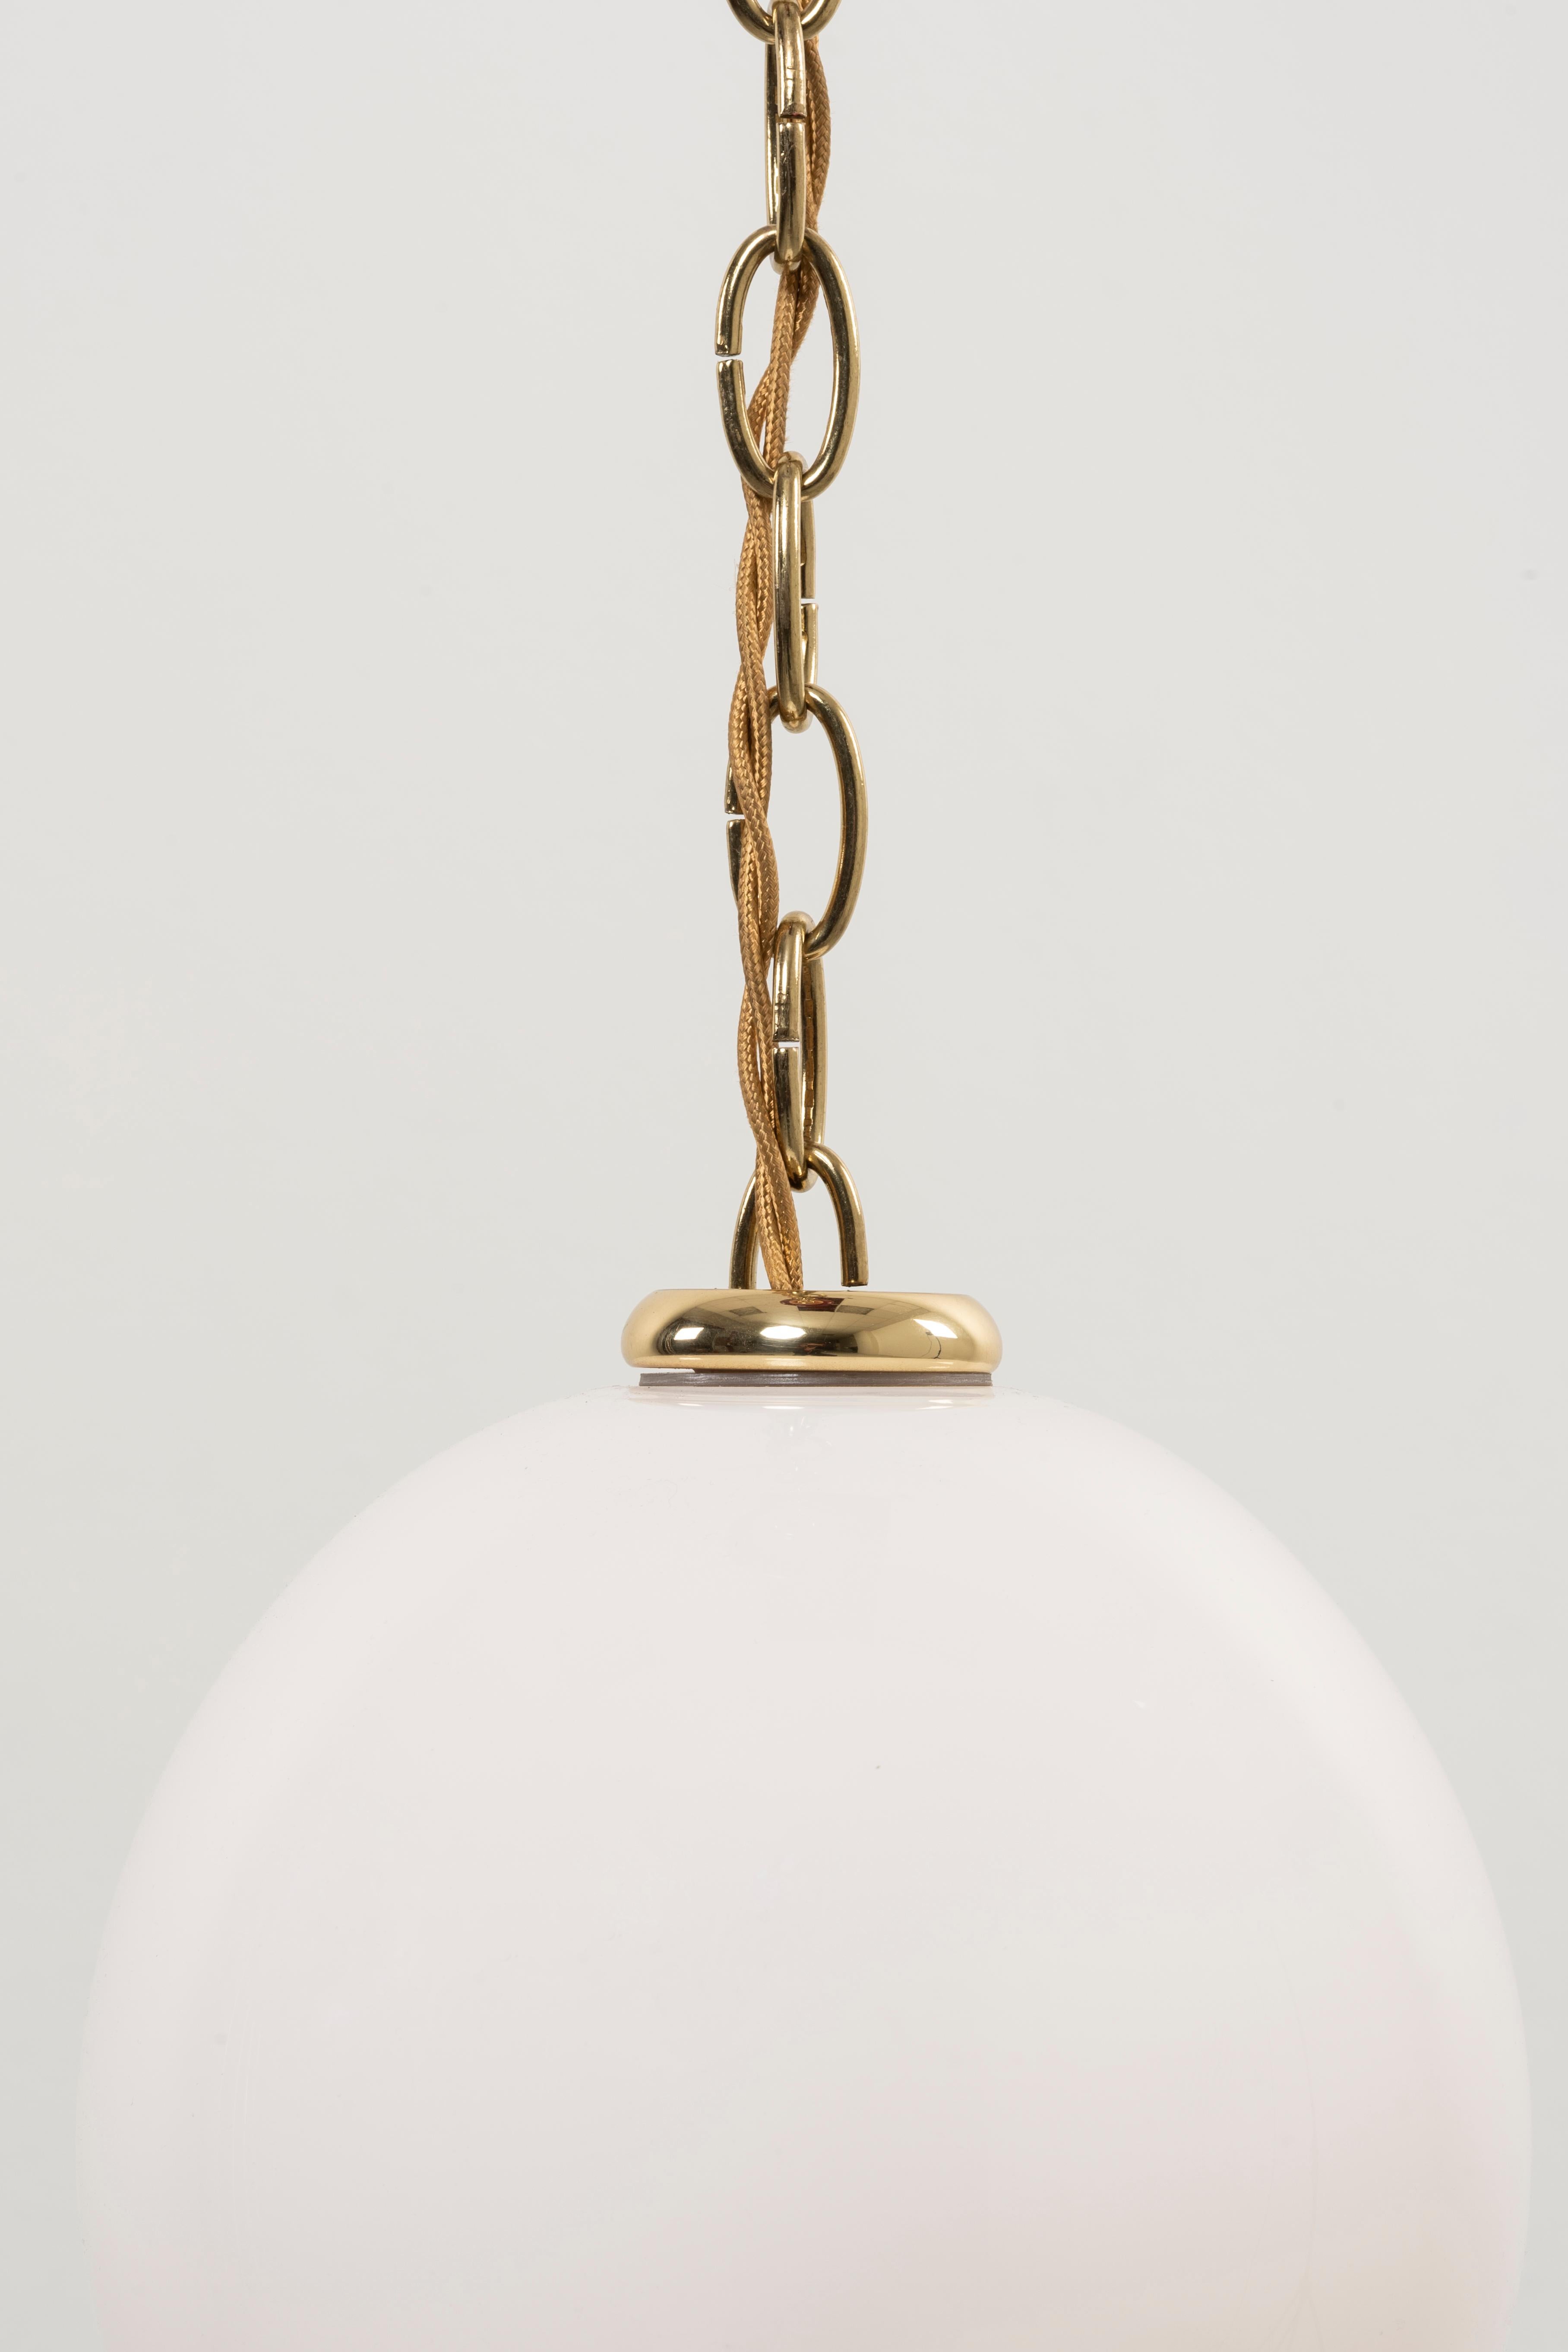 Contemporary Ceiling to Floor Lamp by Analogia Project